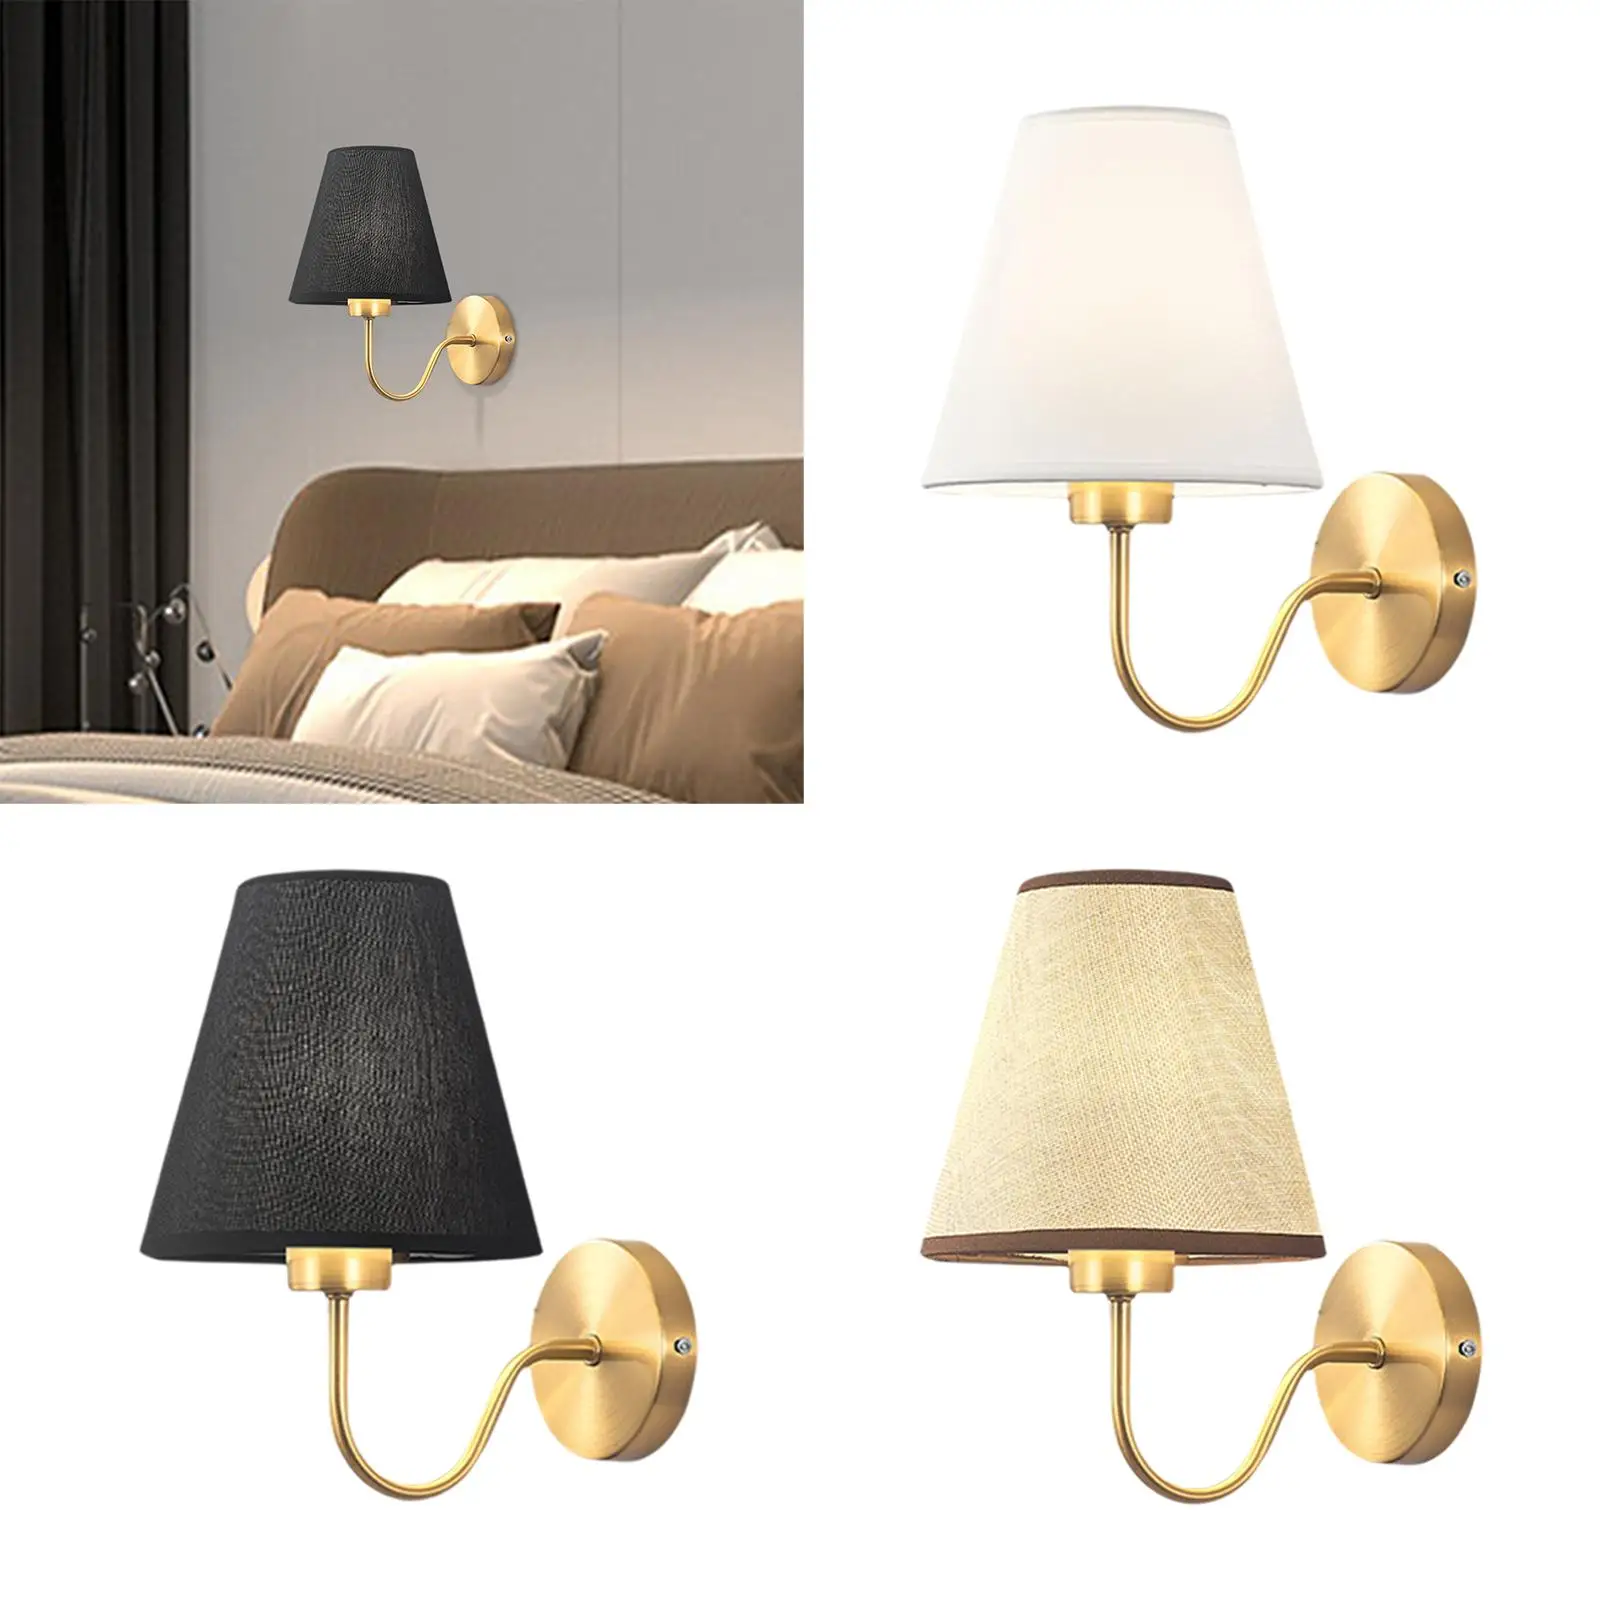 Bedside lamp E27 lampshade lantern wall light for reading living room home